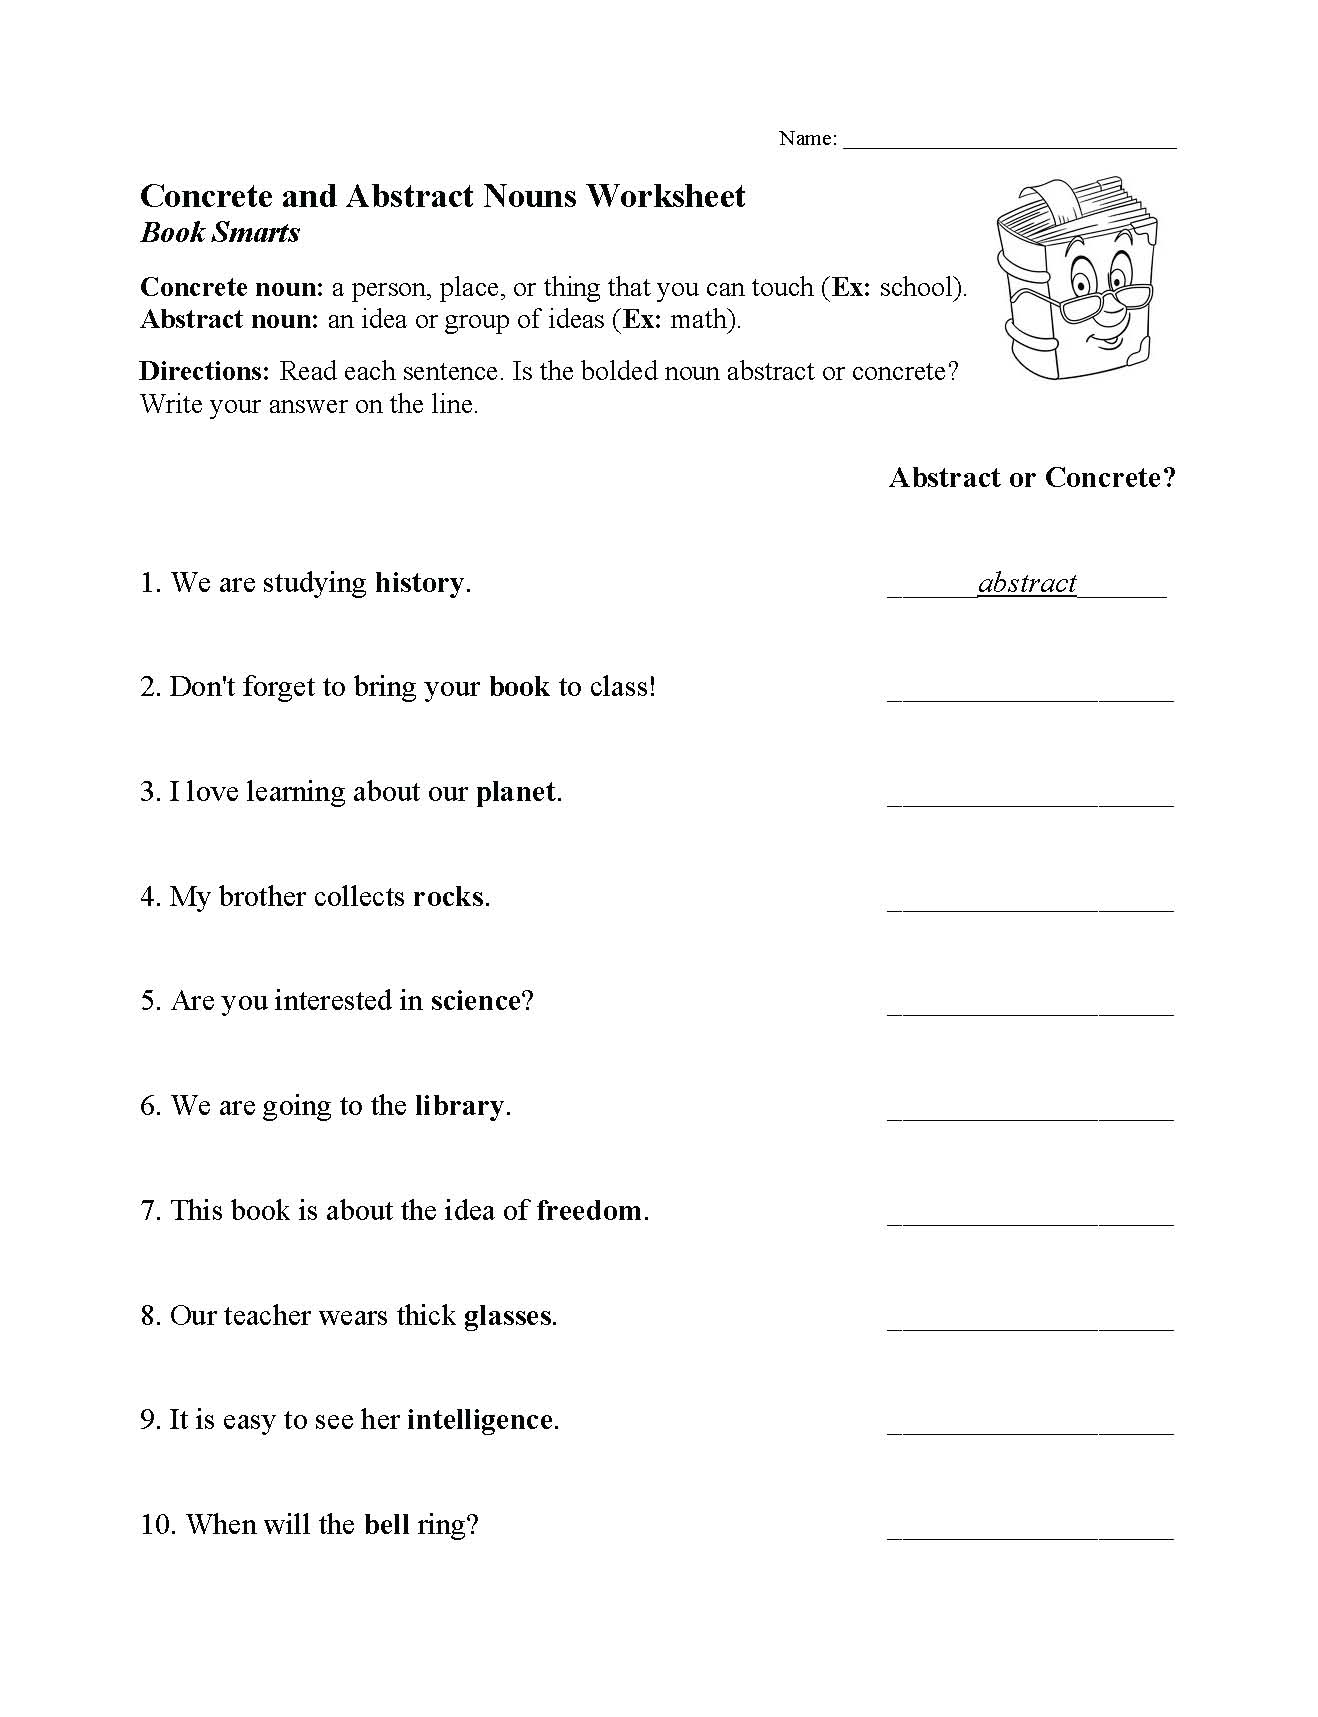 This is a preview image of our Concrete and Abstract Nouns Worksheet. Click on it to enlarge this image and view the source file.